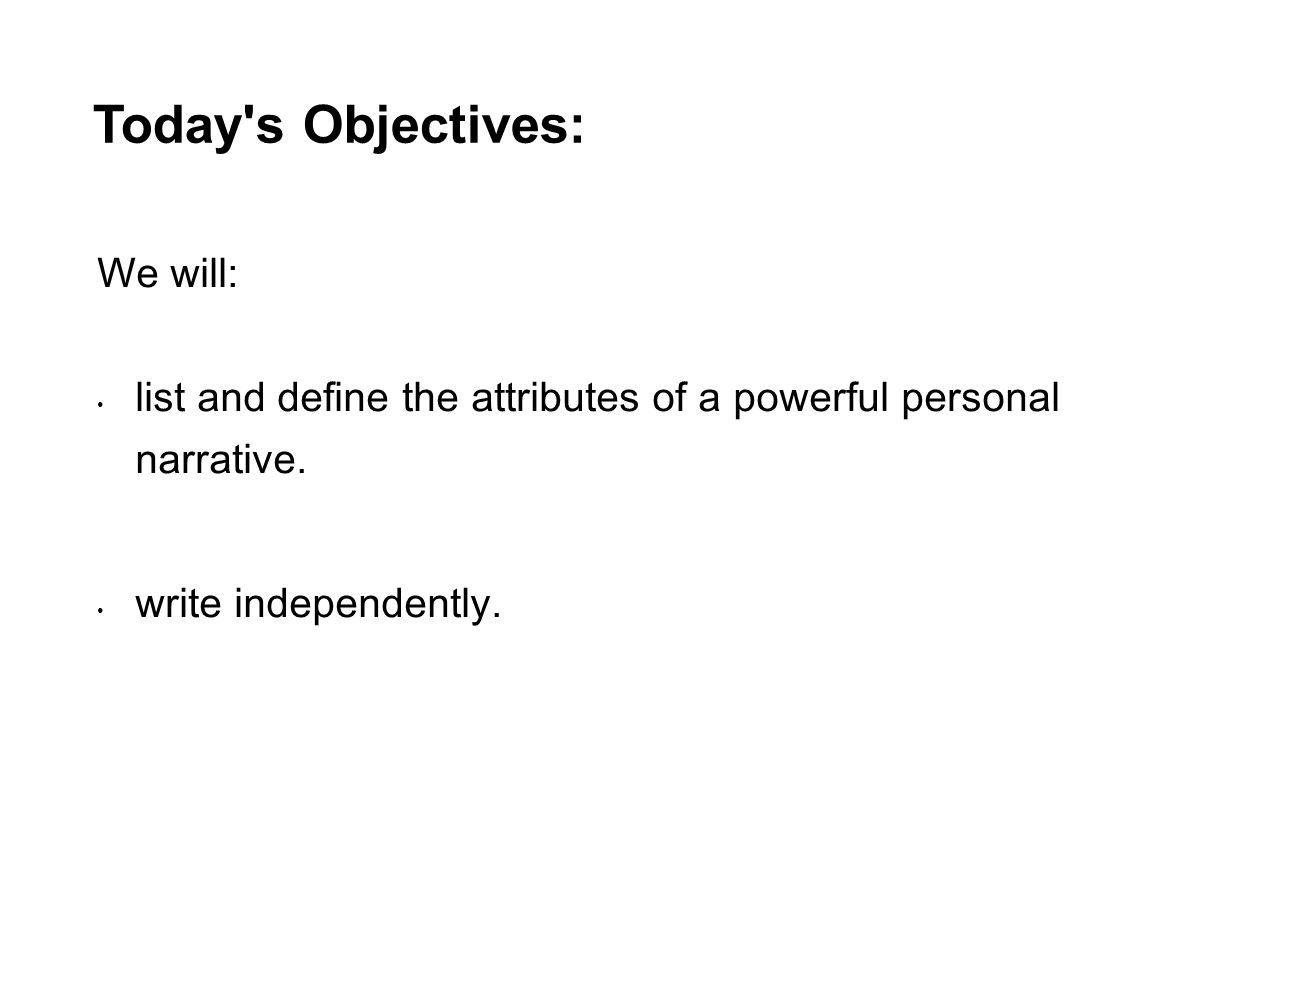 Today s Objectives: We will: list and define the attributes of a powerful personal narrative.